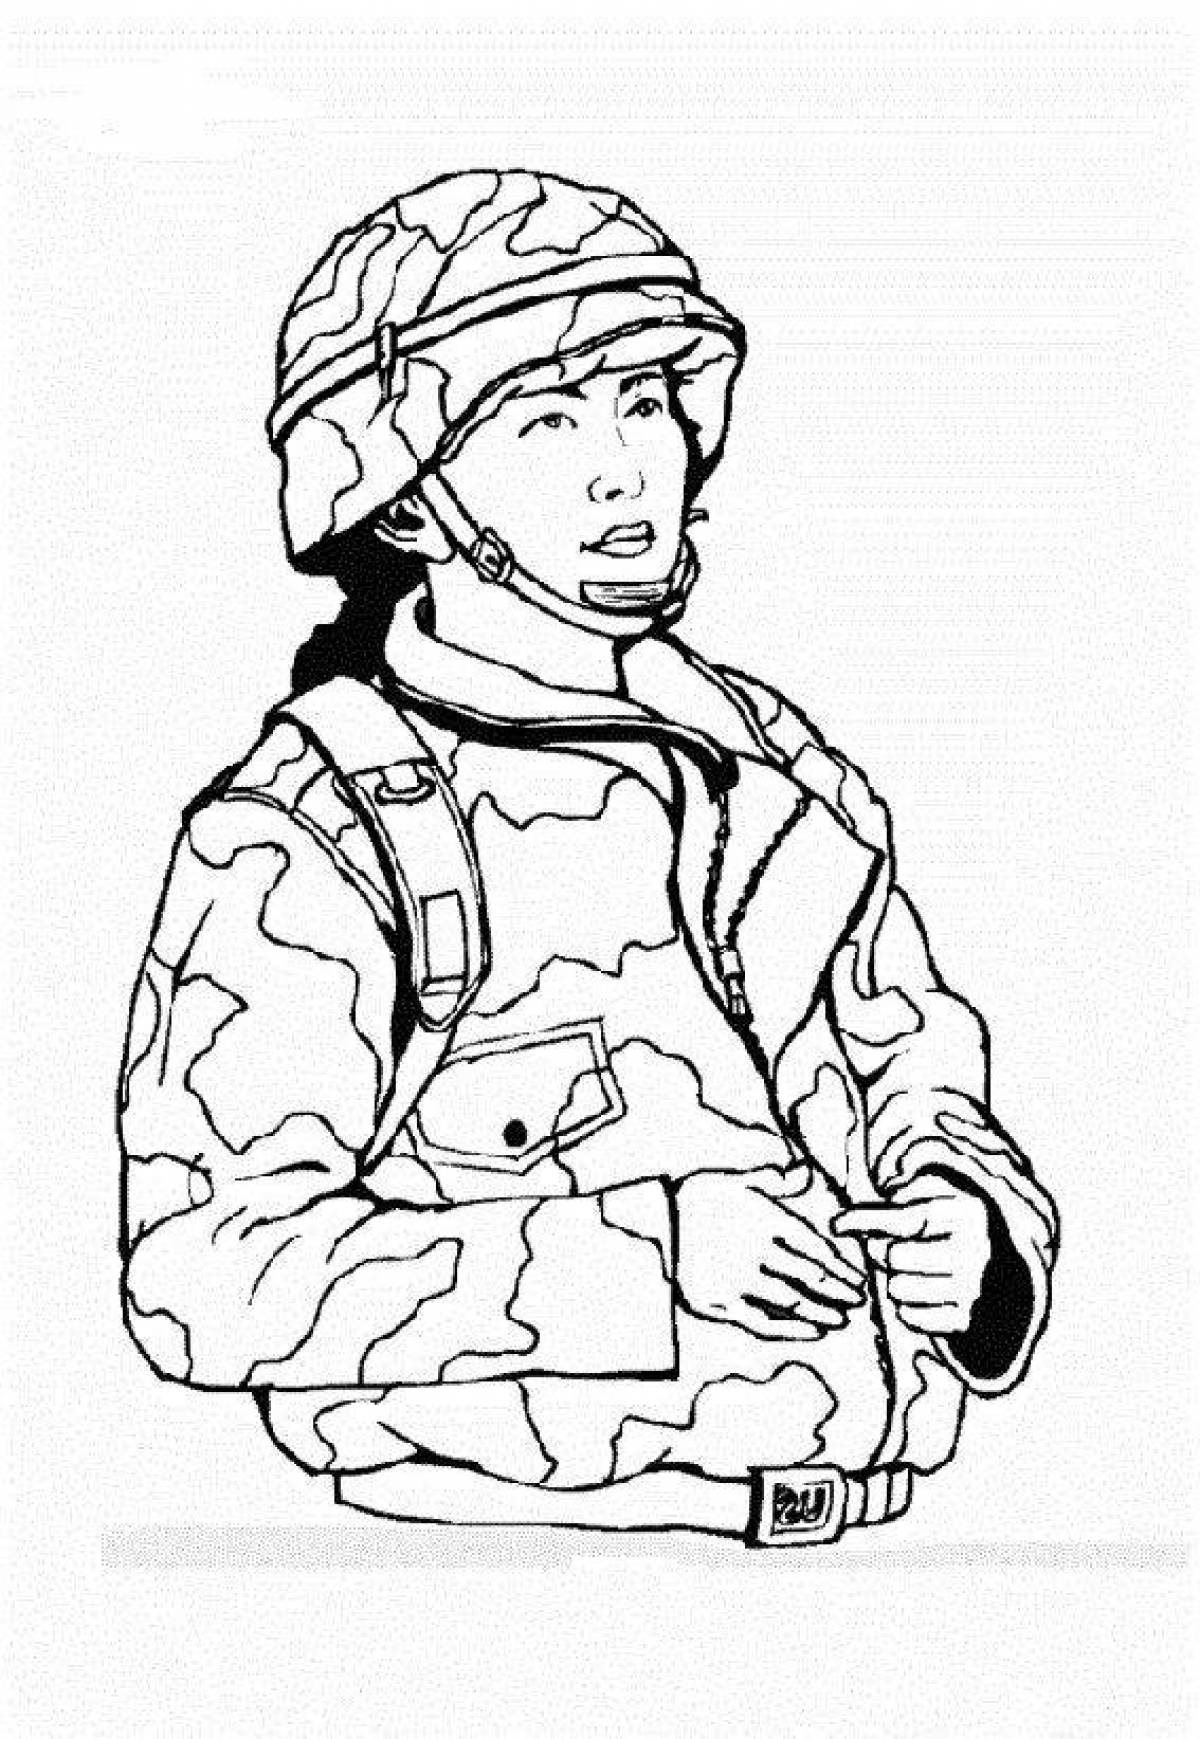 Amazingly detailed Russian soldier coloring page